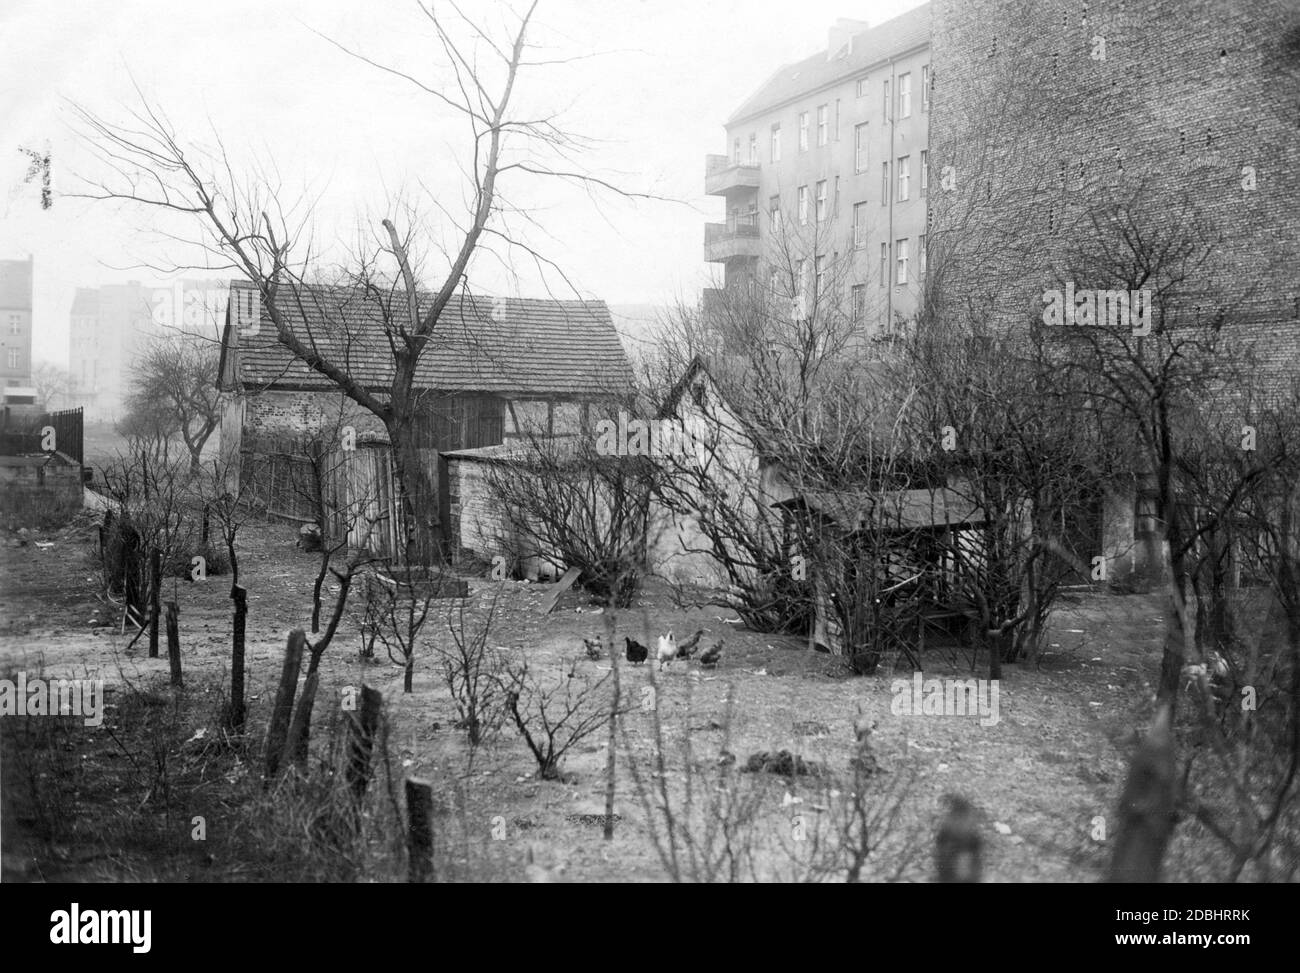 An old (and one of the last remaining) farms stands in the midst of tenement blocks and new houses in Berlin. Chickens are scratching in the yard. The picture was taken in Berlin-Wilmersdorf between Kurfuerstendamm, Brandenburgische Strasse and Ravensbergerstrasse in 1931. Stock Photo